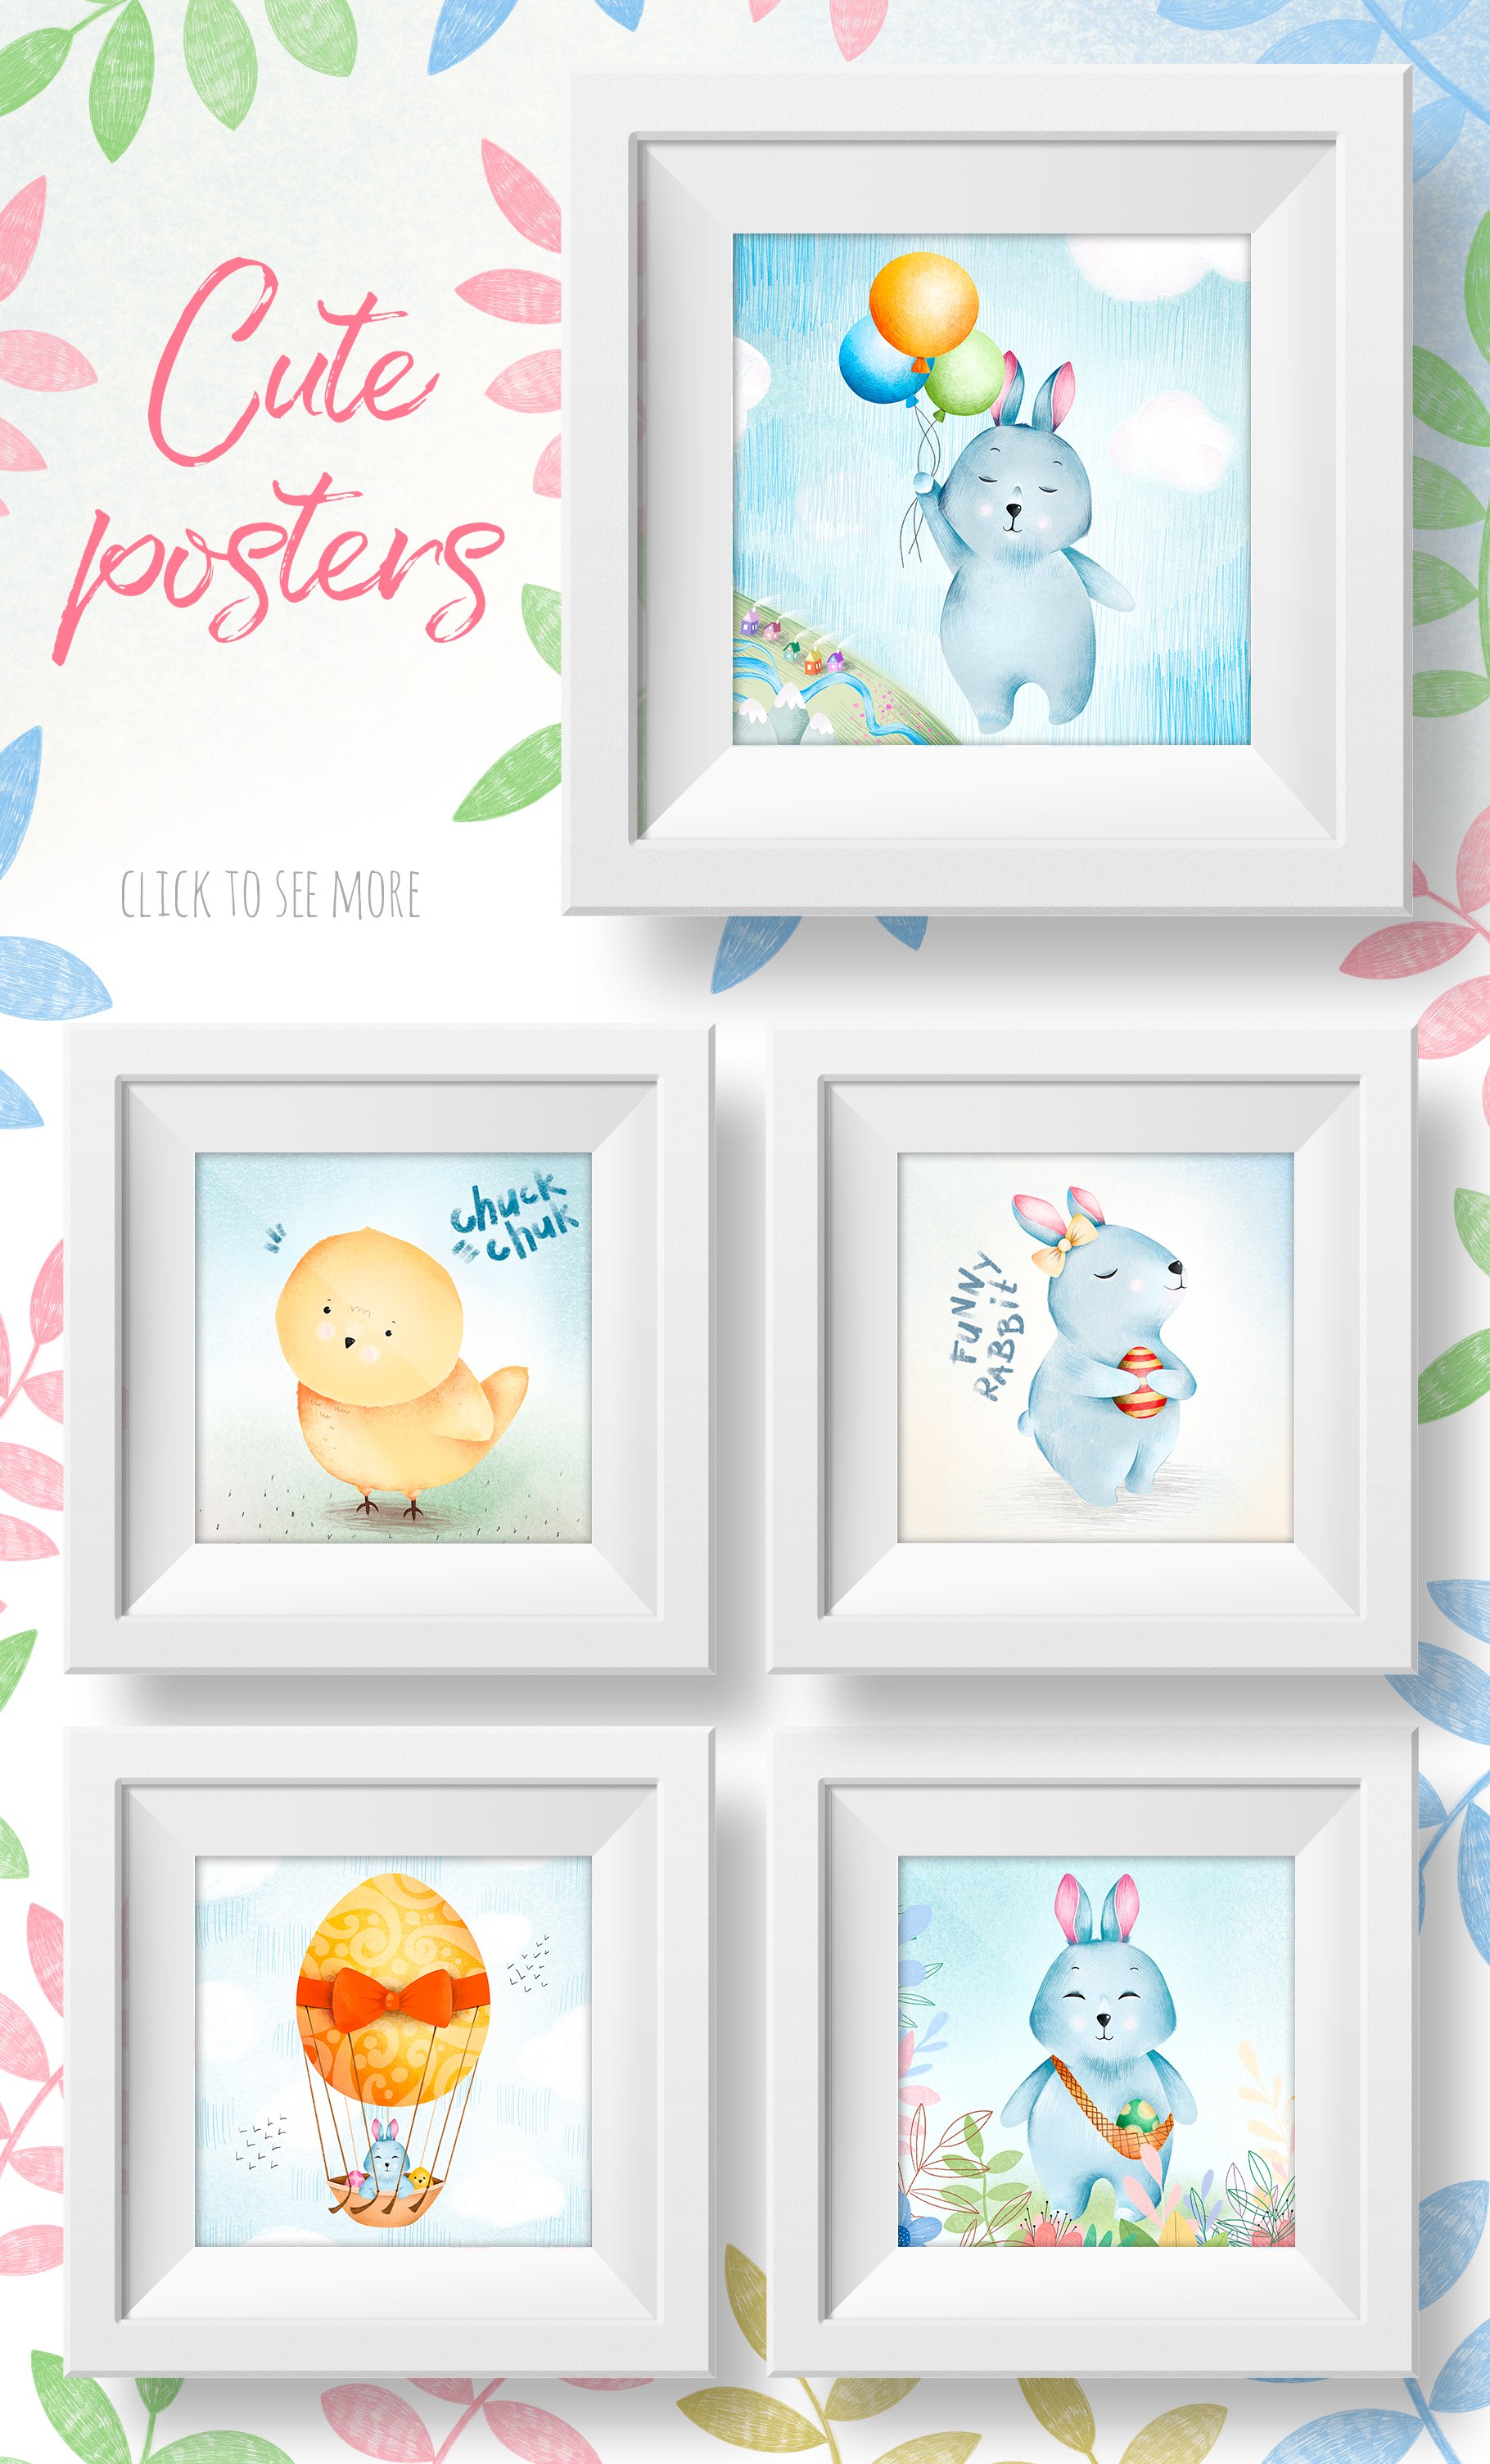 Easter Adventure - Cute Hand Drawn Collection